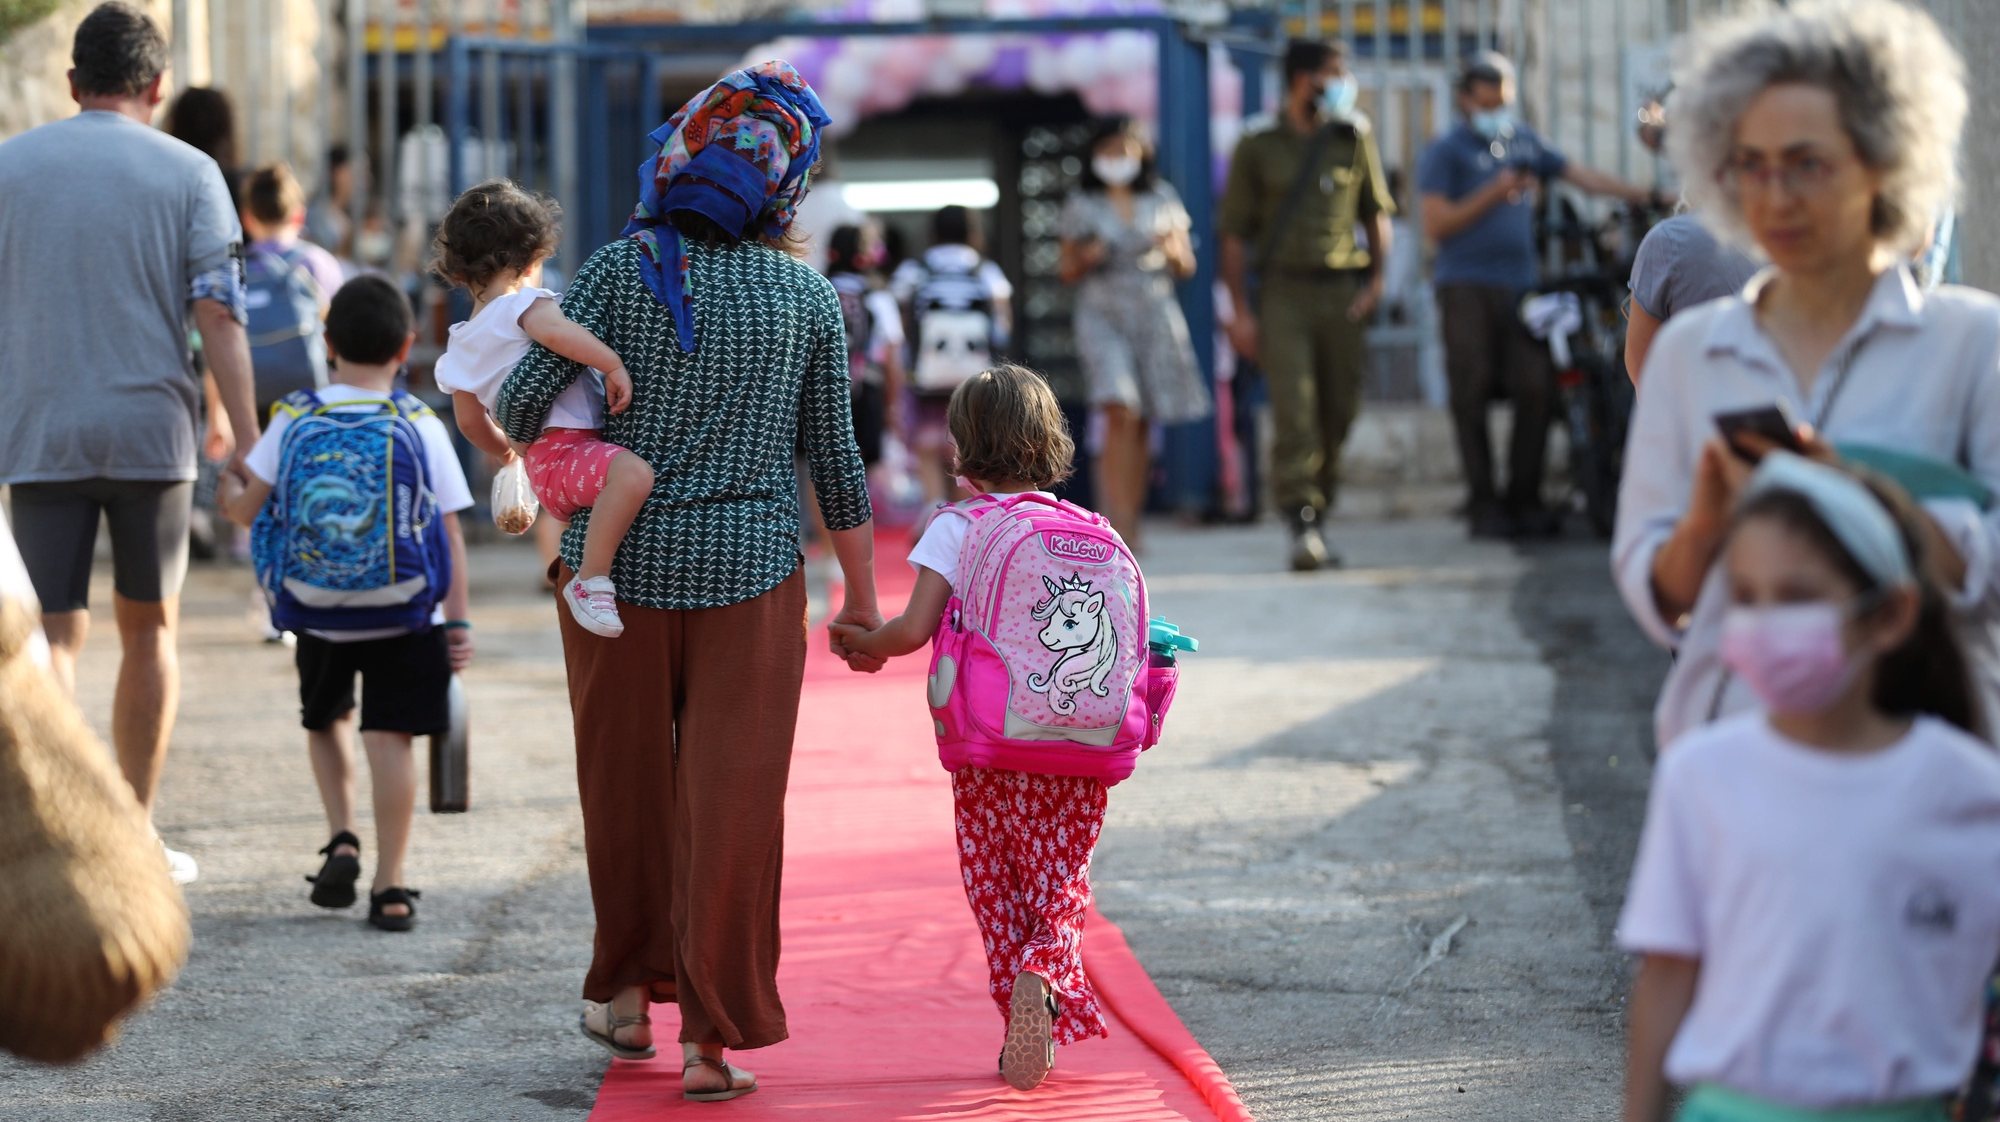 epa09439776 Children enter an elementary school on the first day of school in Jerusalem, Israel, 01 September 2021. Israel started a national quick Covid-19 testing campaign for kids aged 3 to 12 in order to safely reopen schools on September 01.  EPA/ABIR SULTAN